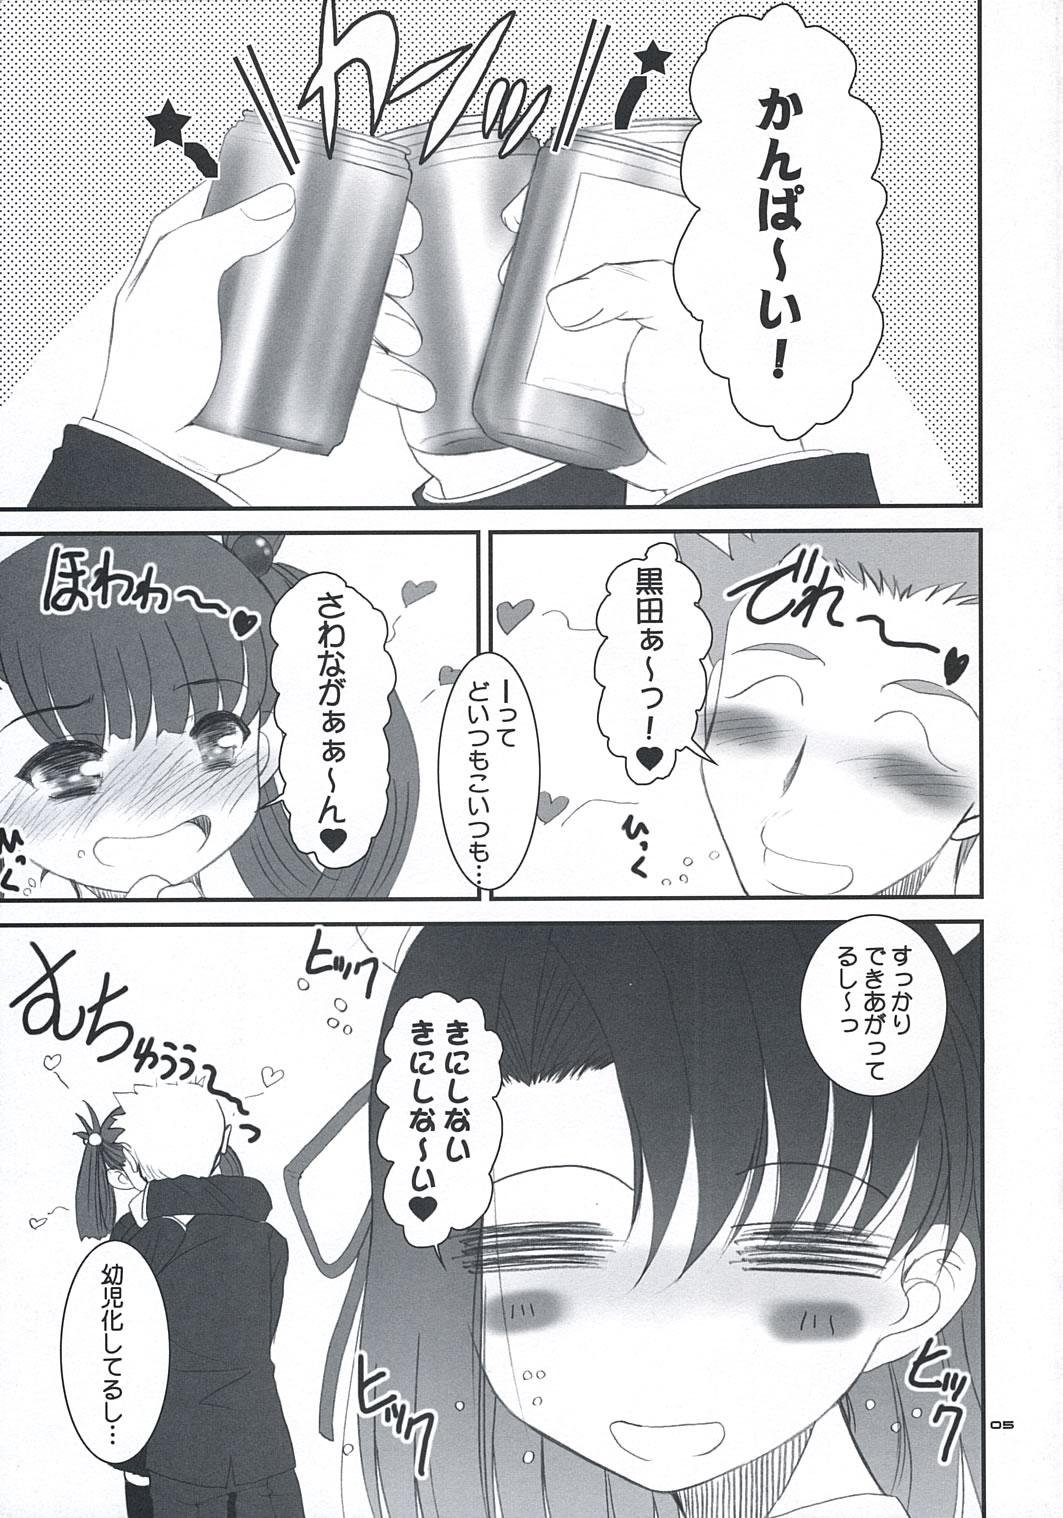 Mexico secchan no himichu - School days Story - Page 4